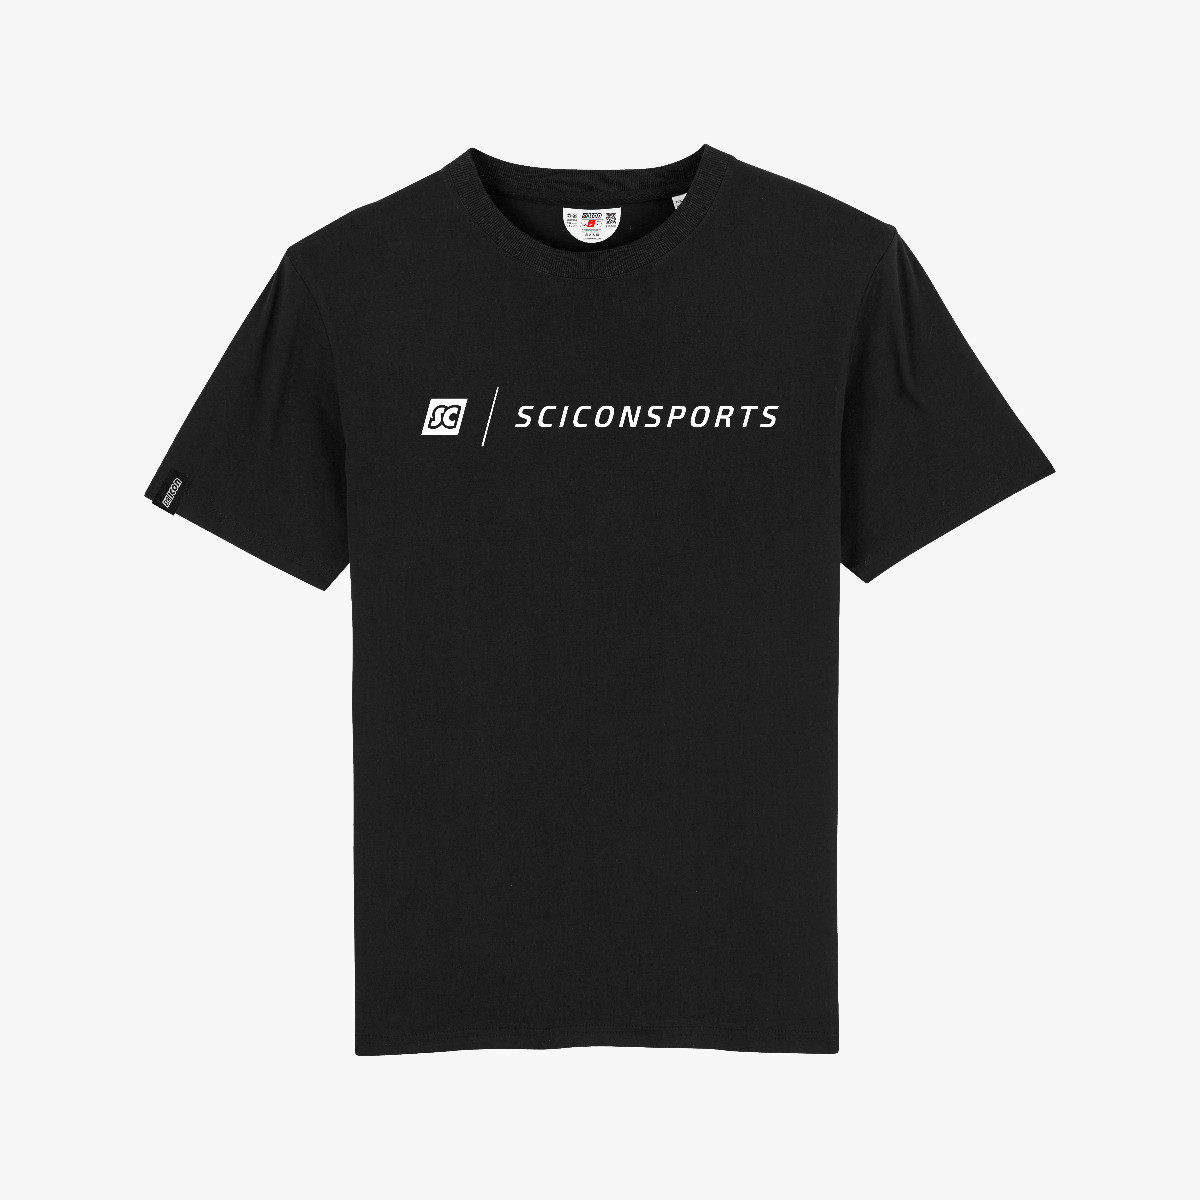 sciconsports t-shirt black ts61882
